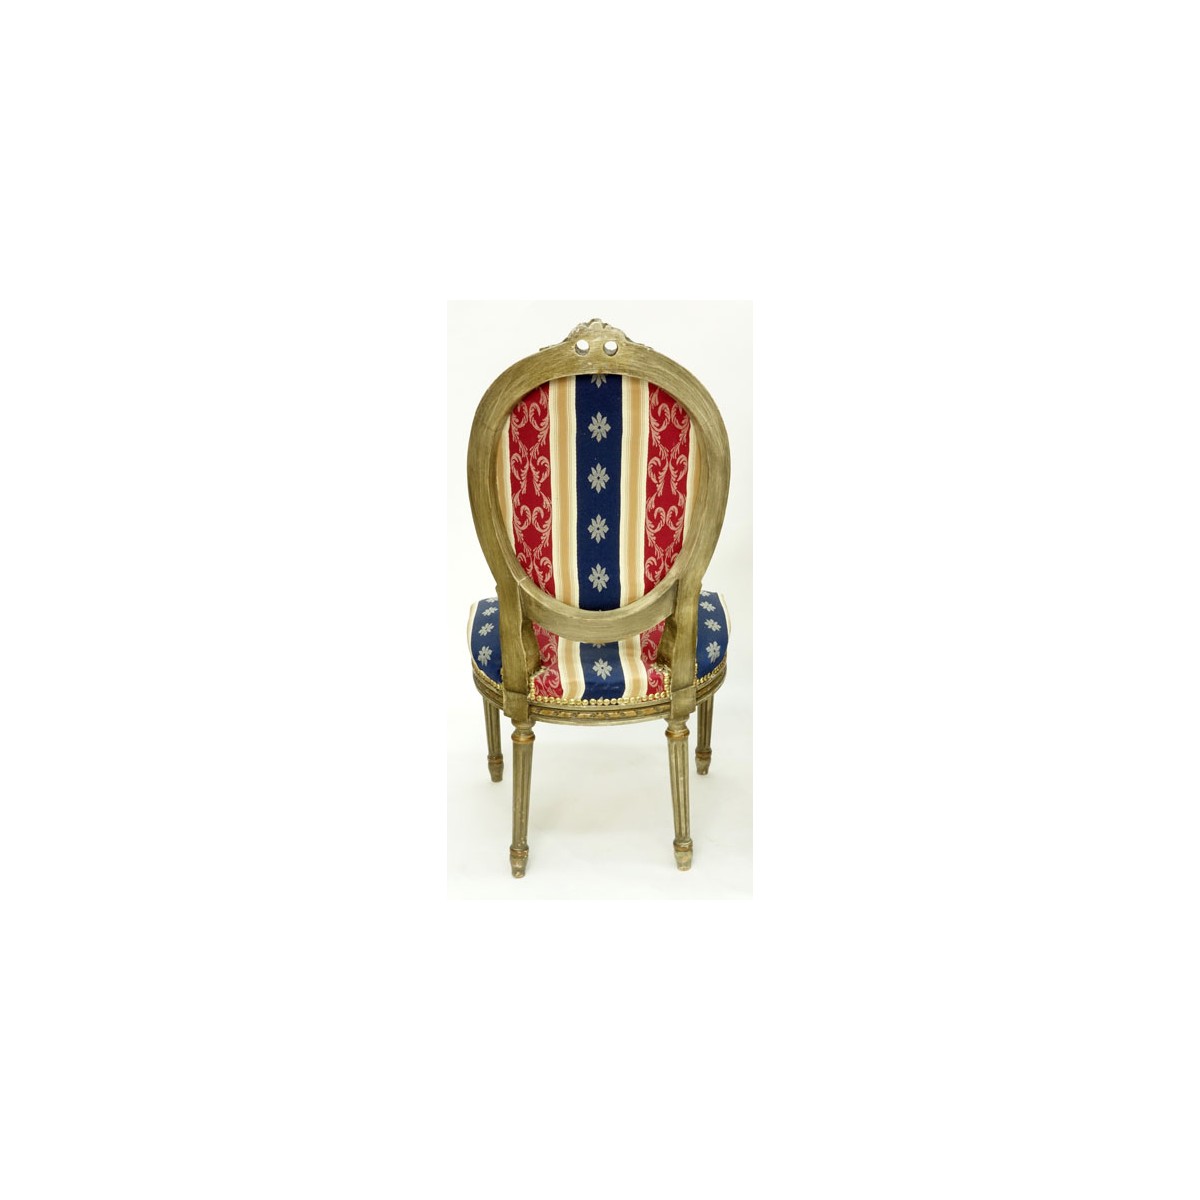 Louis XVI Style 3pc. Upholstered Salon Furniture Set. Includes: s